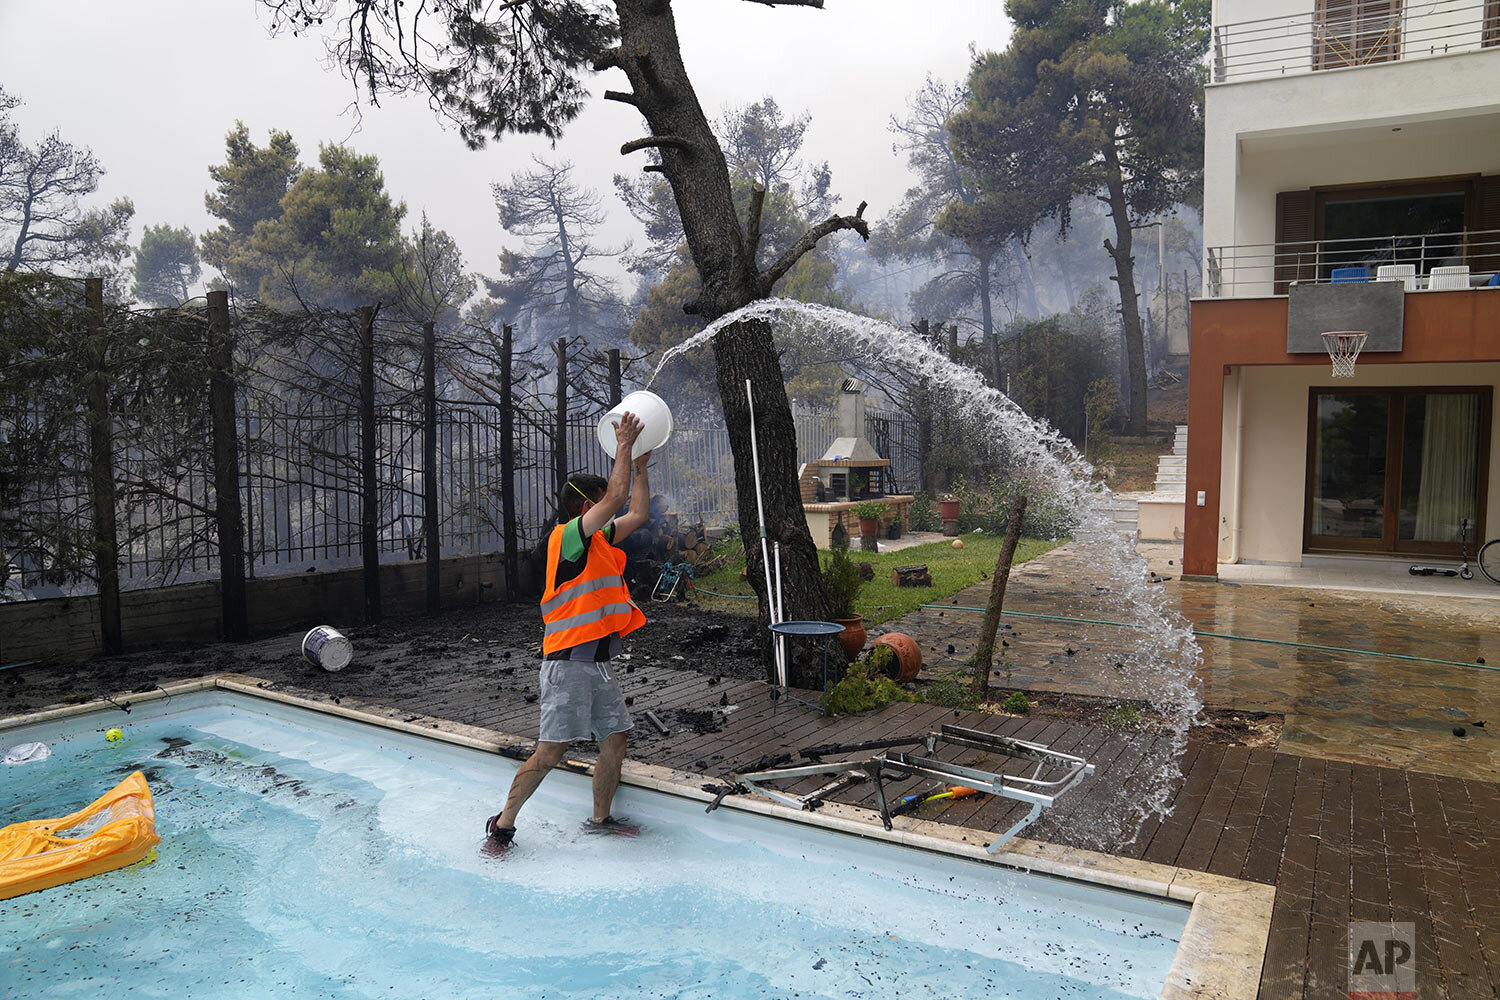  A man throws water from a swimming pool as the fire approaches his house in Ippokratios Politia village, about 35 kilometres (21 miles) north of Athens, Greece, Friday, Aug. 6, 2021. Thousands of people fled wildfires burning out of control in Greec